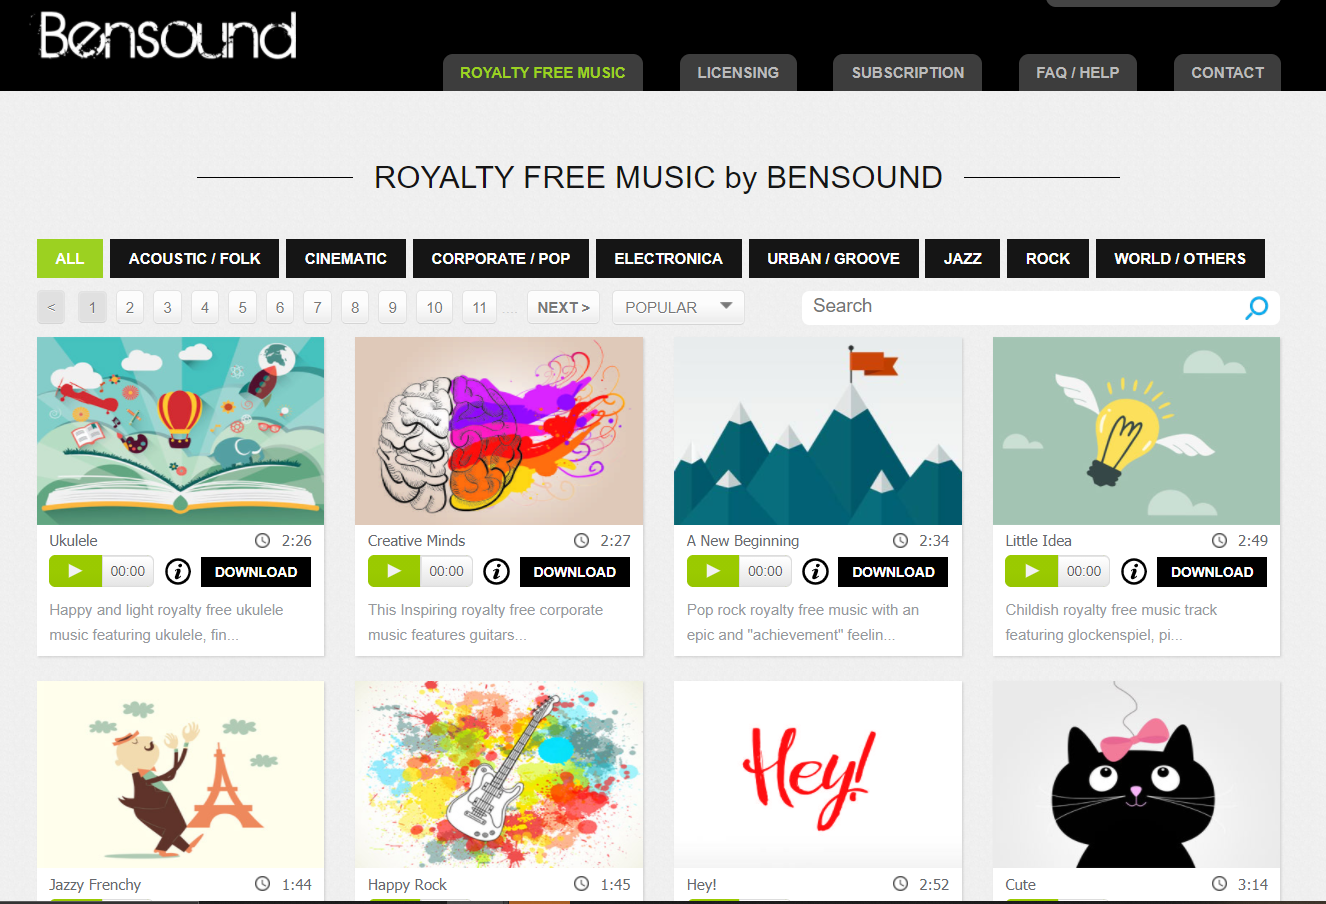 Bensound is great place to find good background music for videos. The interface has a well catalogued music items. 